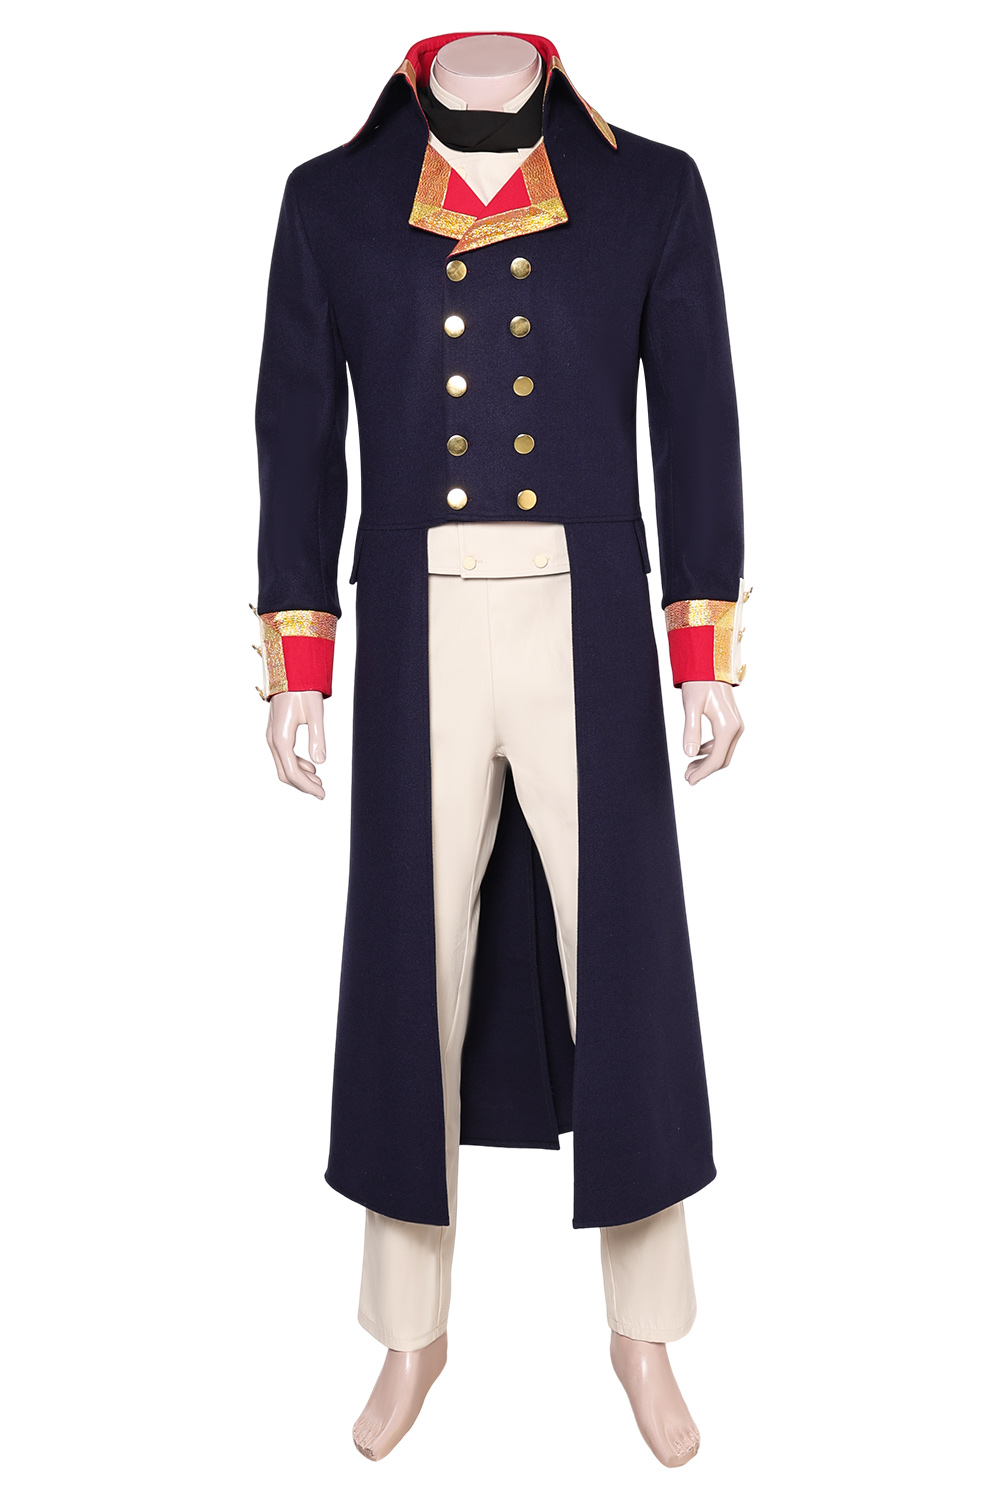 Movie Napoleon Blue Outfits Halloween Carnival Suit Cosplay Costume